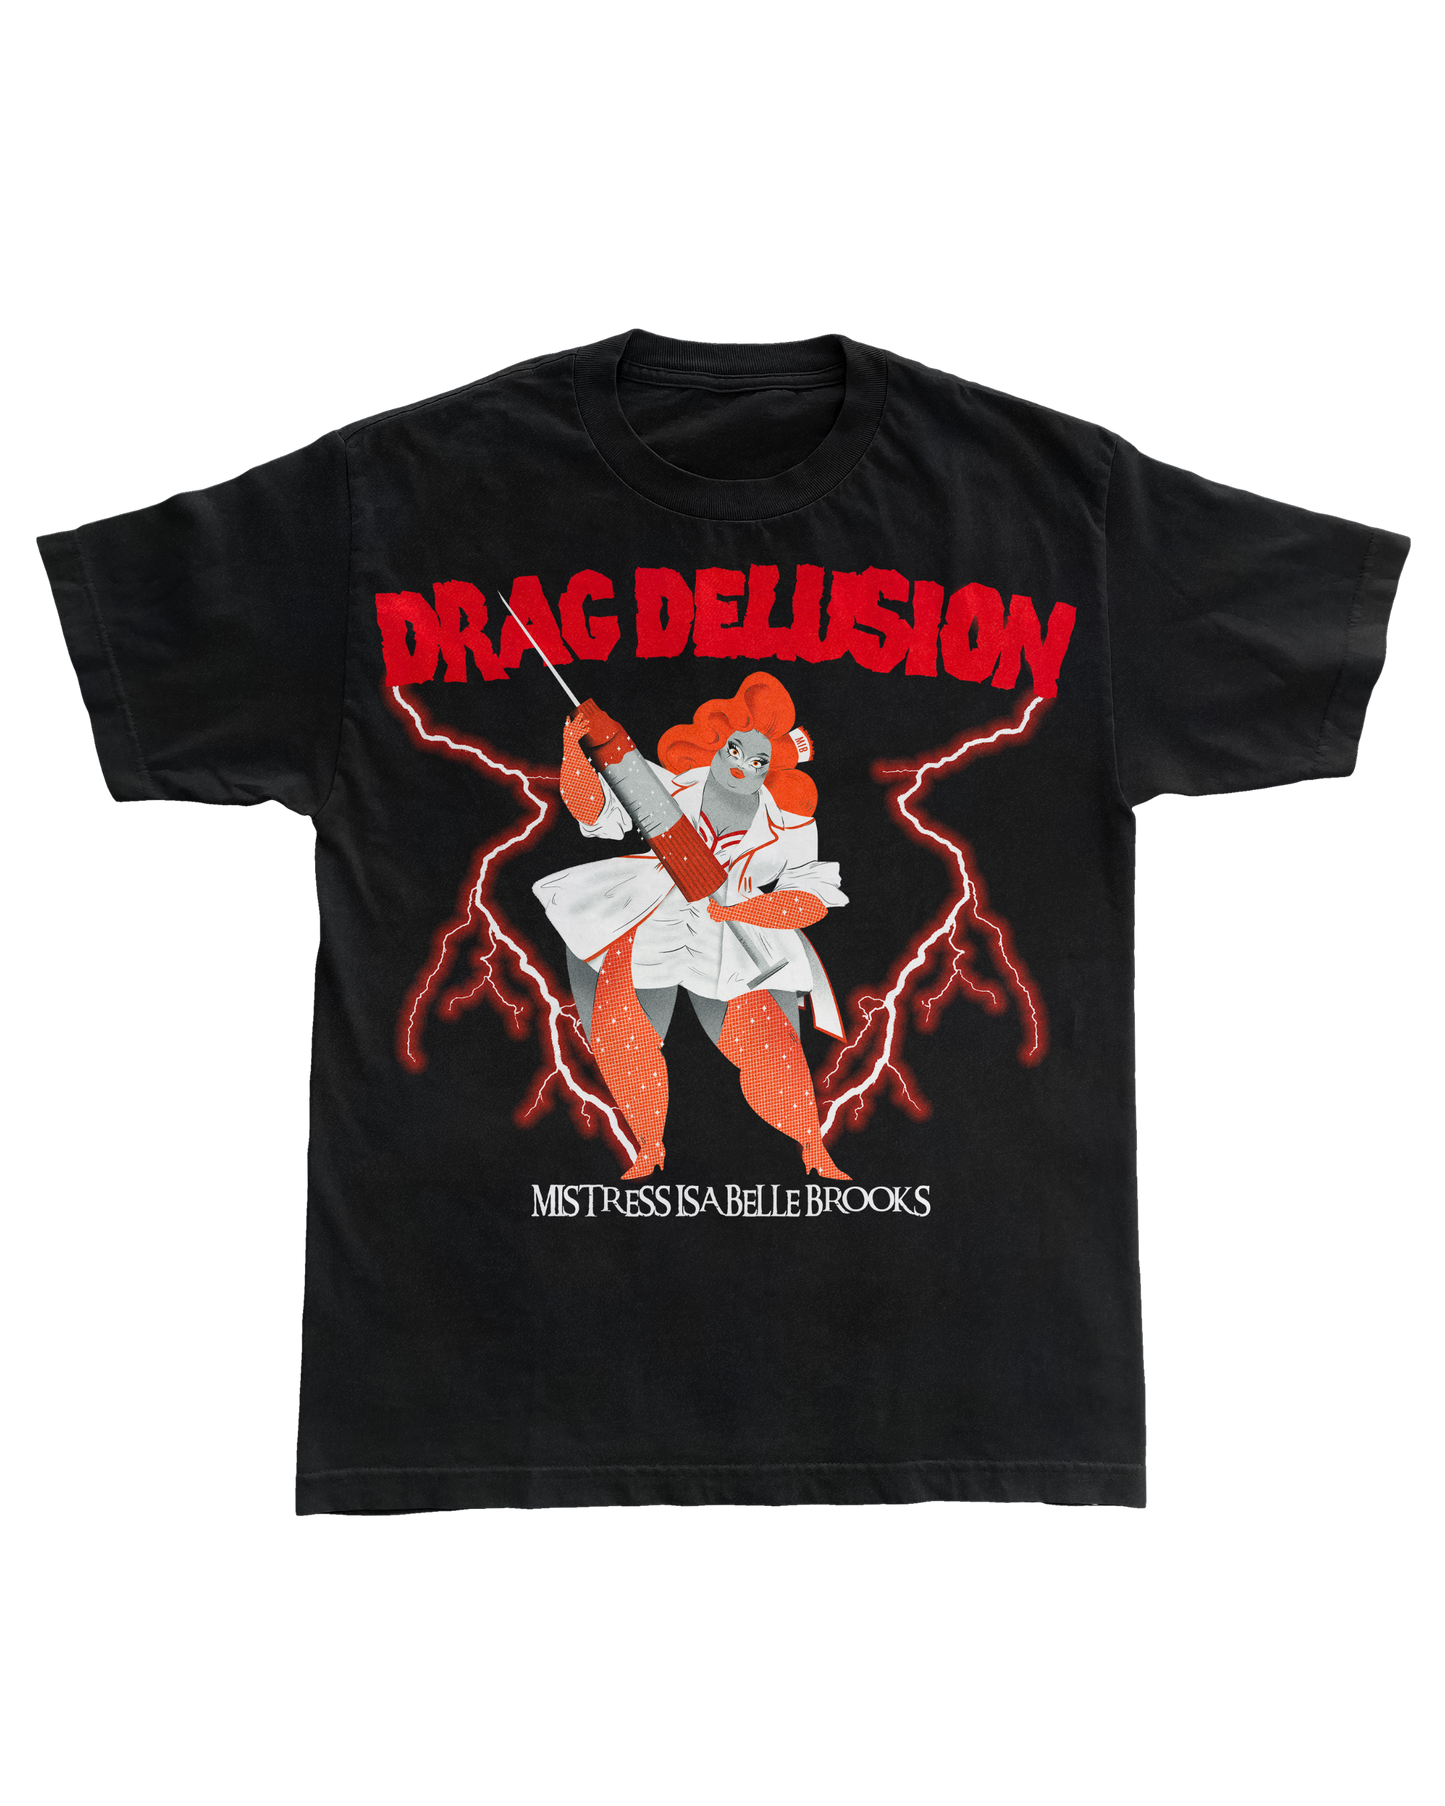 LMTD EDITION: DRAG DELUSION FINALE TEE